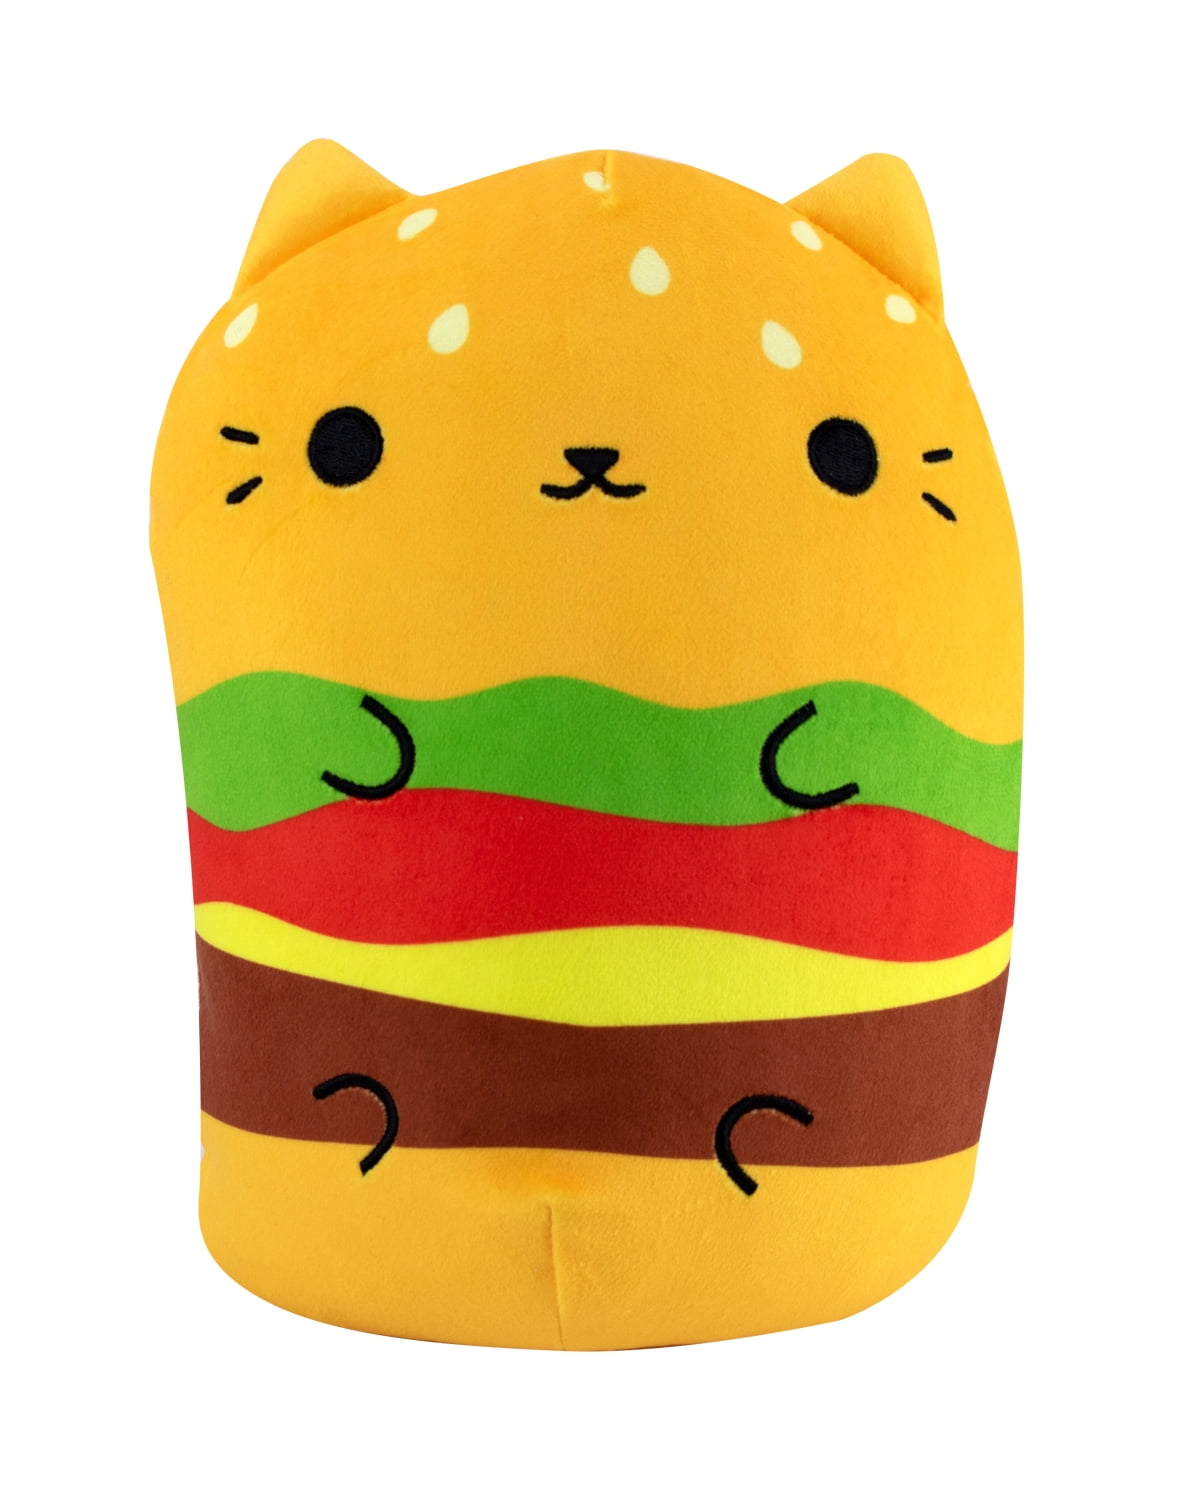 Emotional Support Burger : r/Jellycatplush